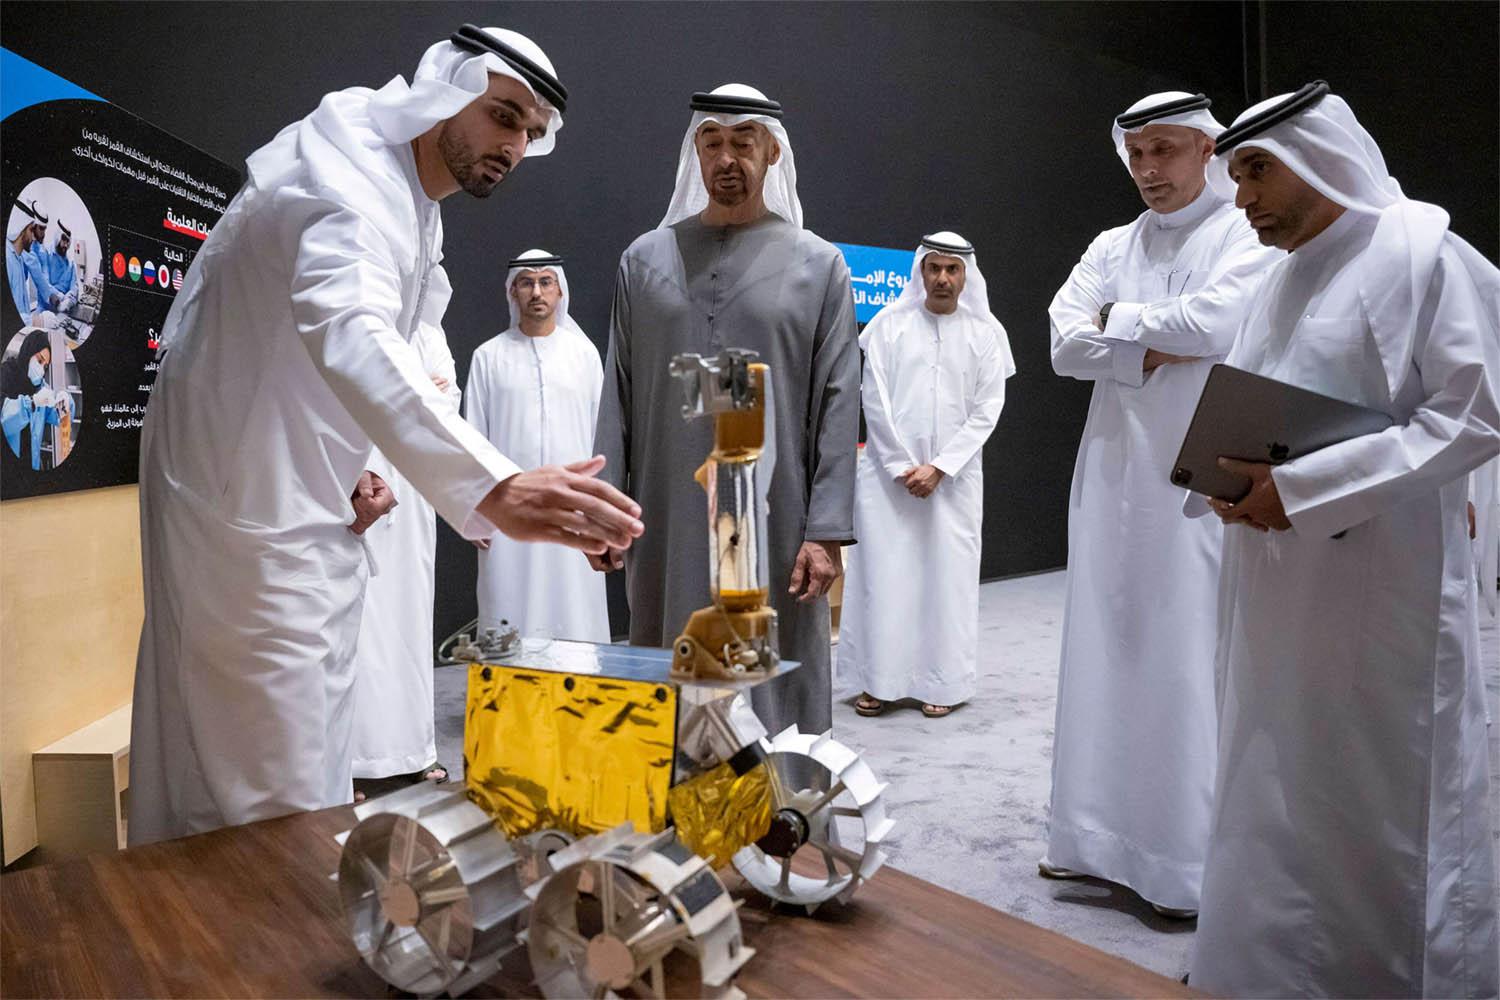 The UAE is continuously developing its space programme